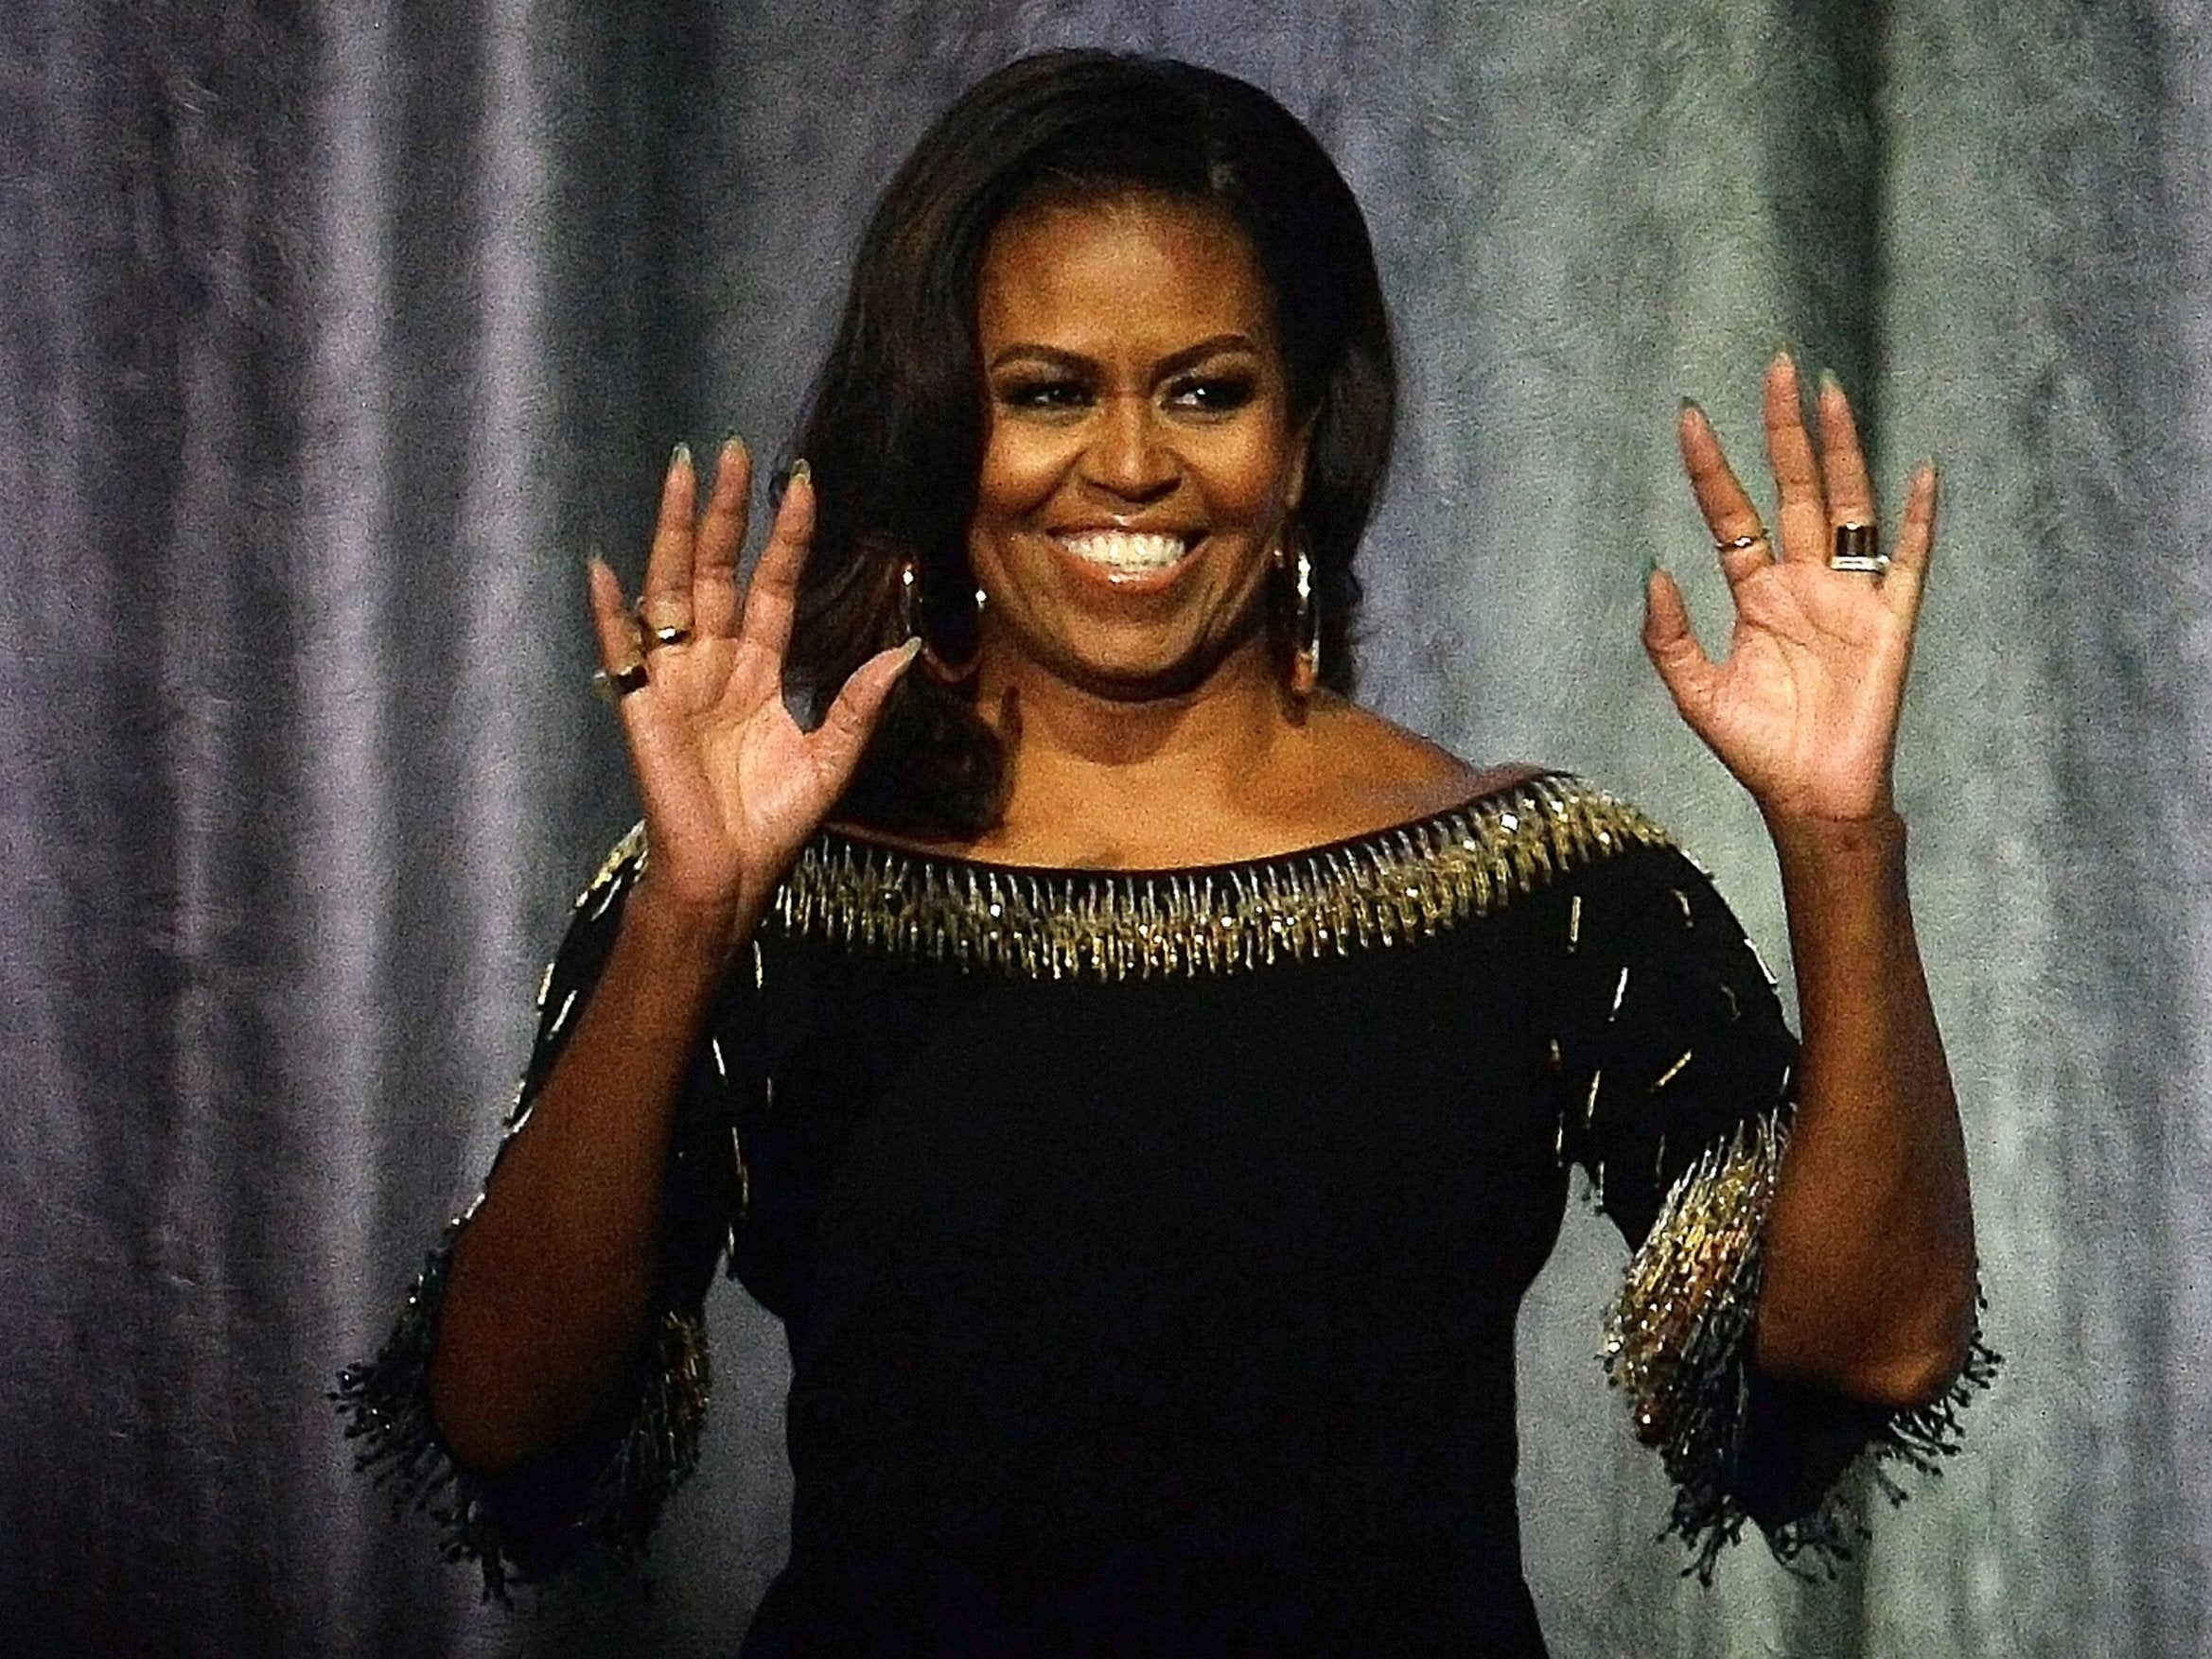 The former first lady had consistently higher popularity ratings than her husband while they were in the White House